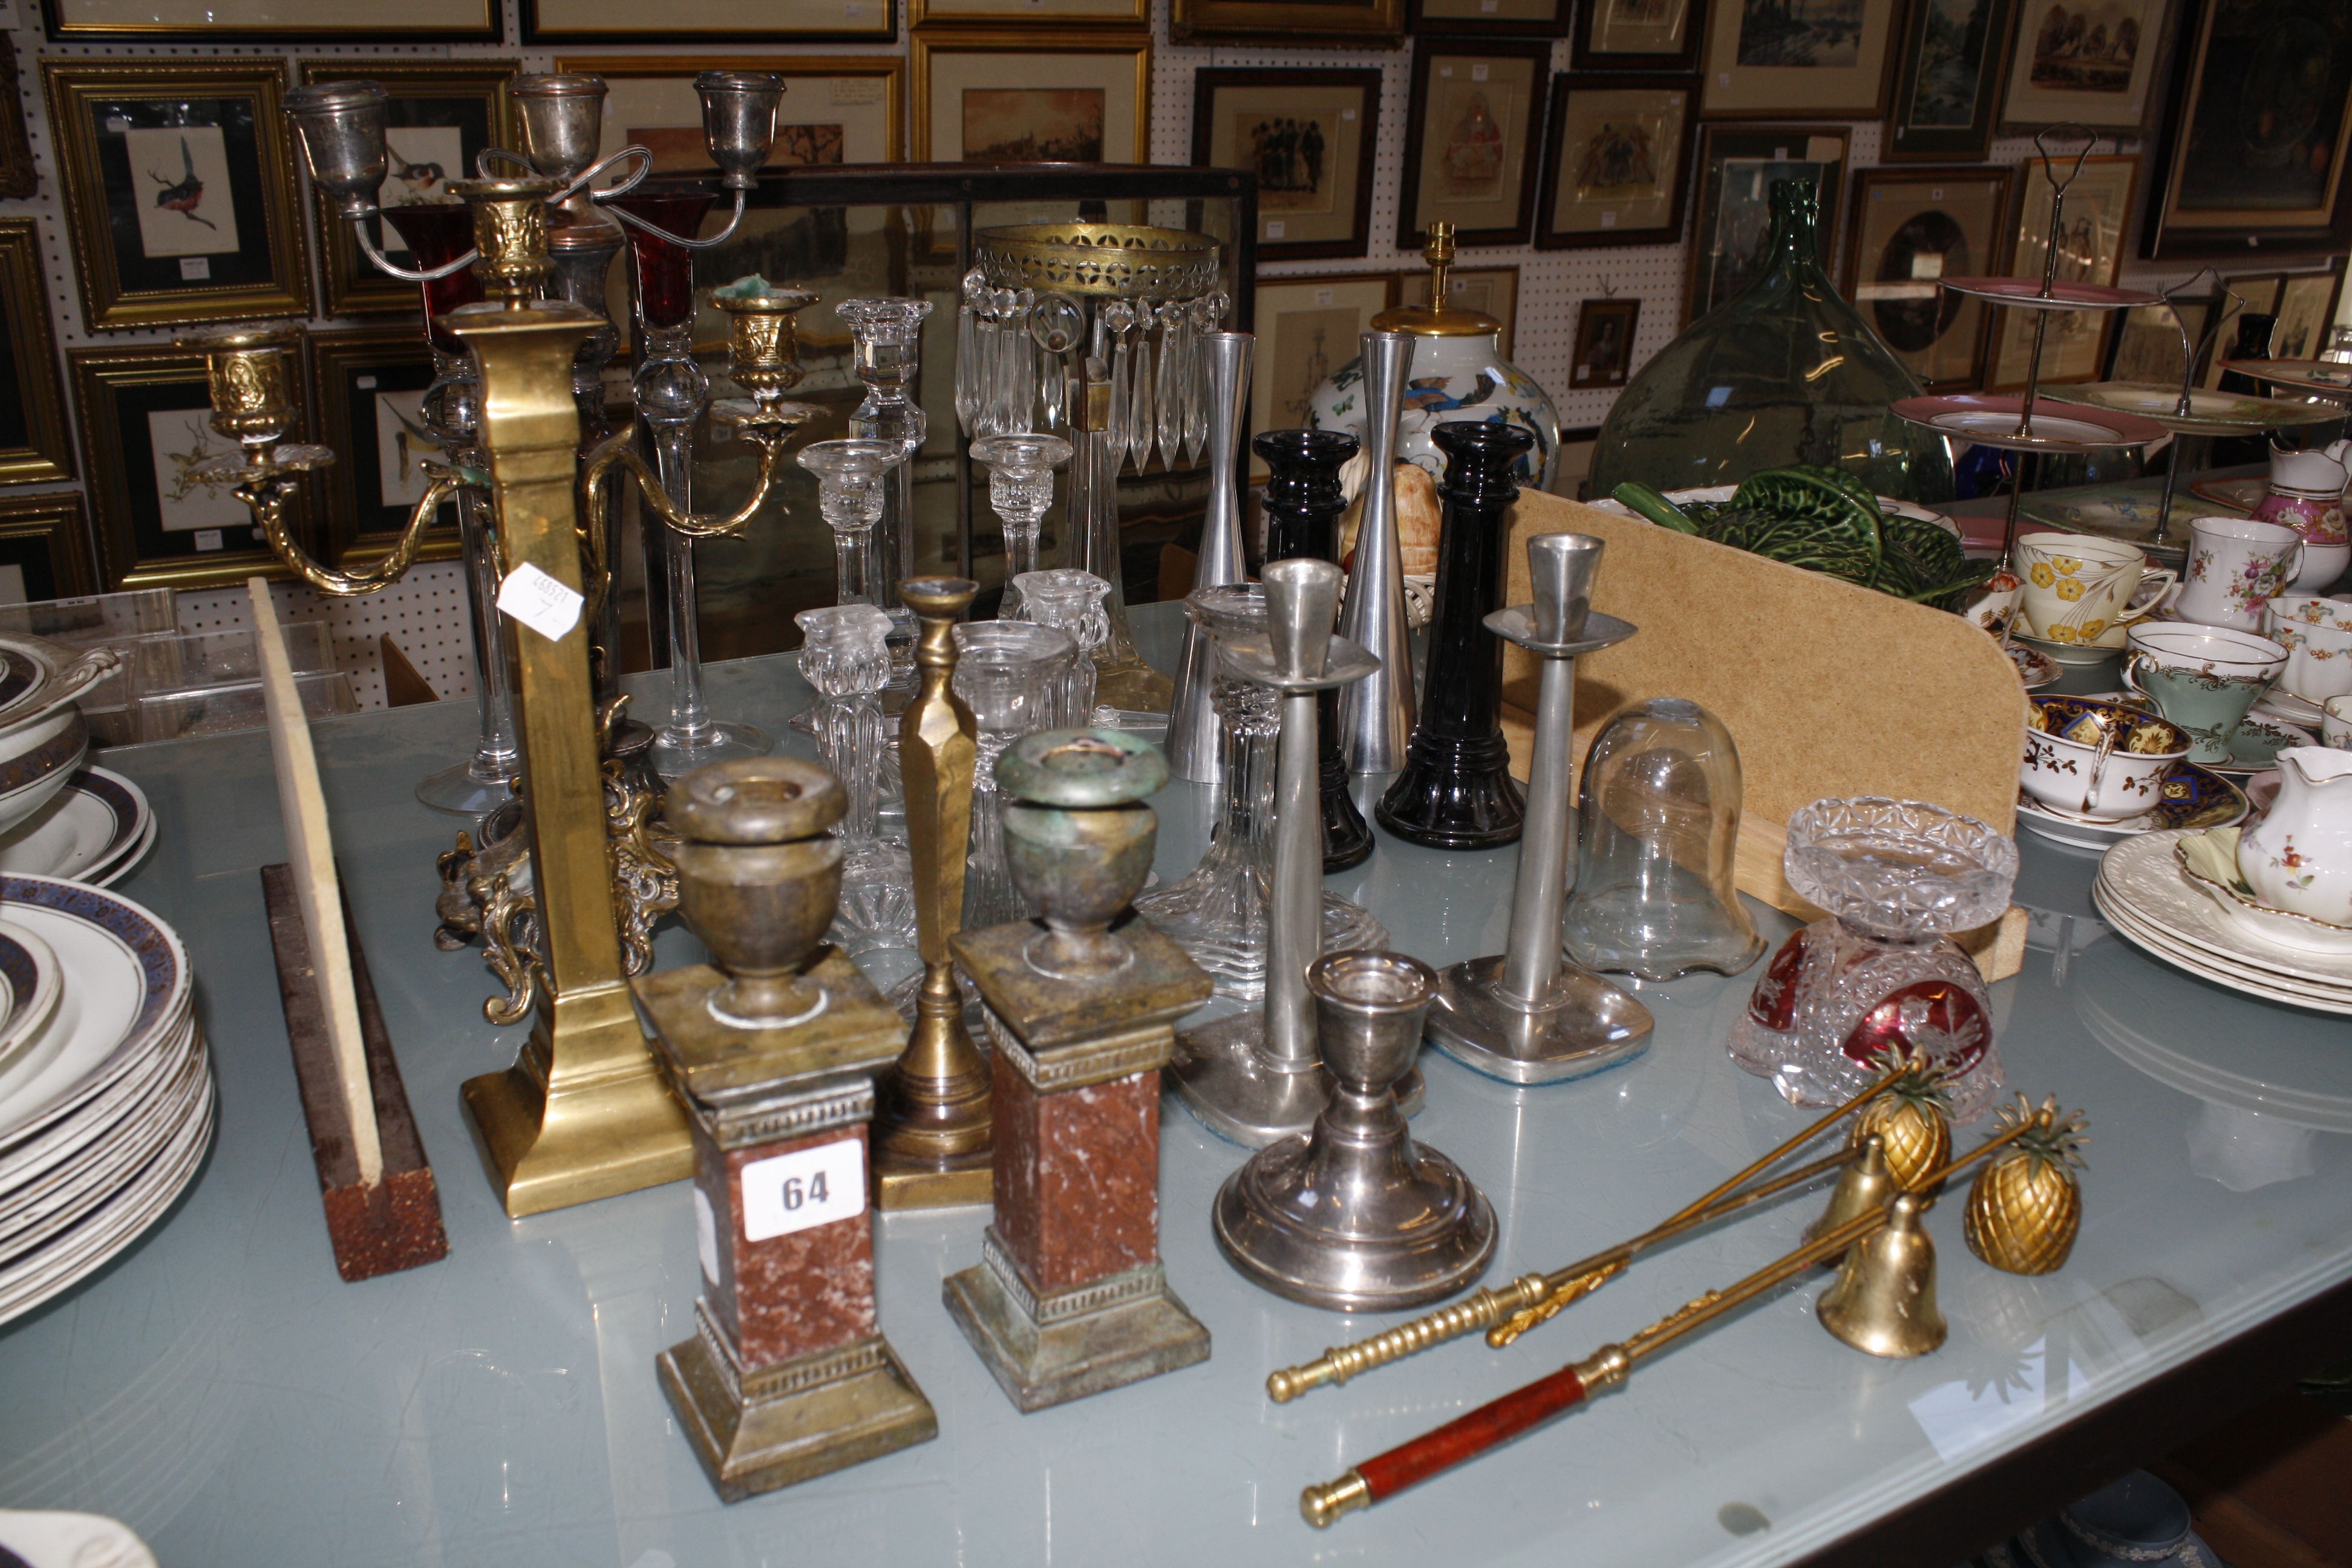 A selection of glass and metal candleholders, to include a pair of brass urns on marble stands, a